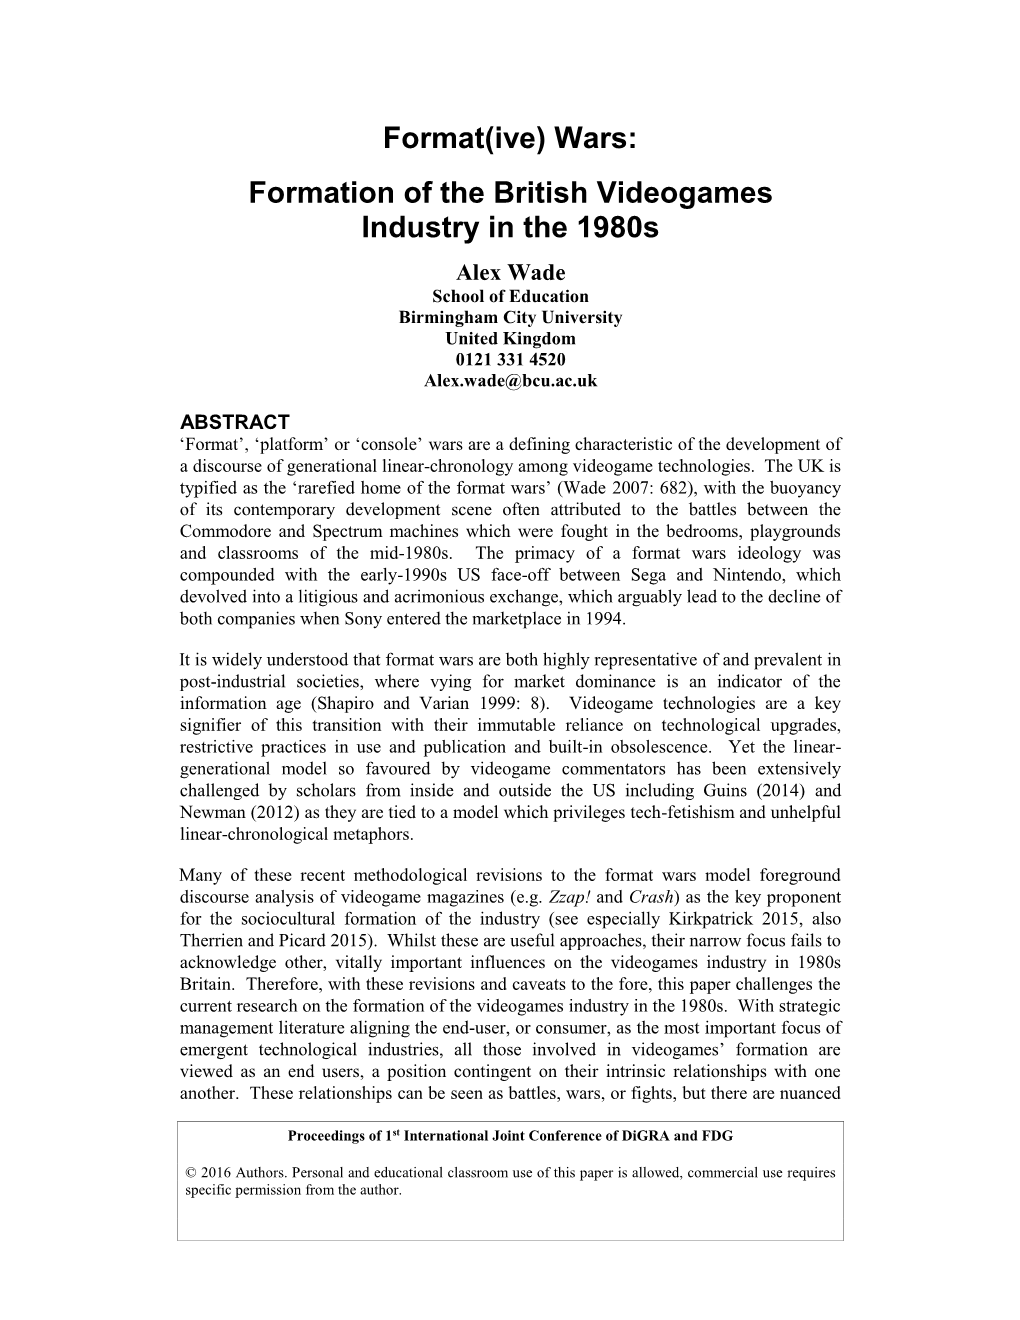 Format(Ive) Wars: Formation of the British Videogames Industry in The